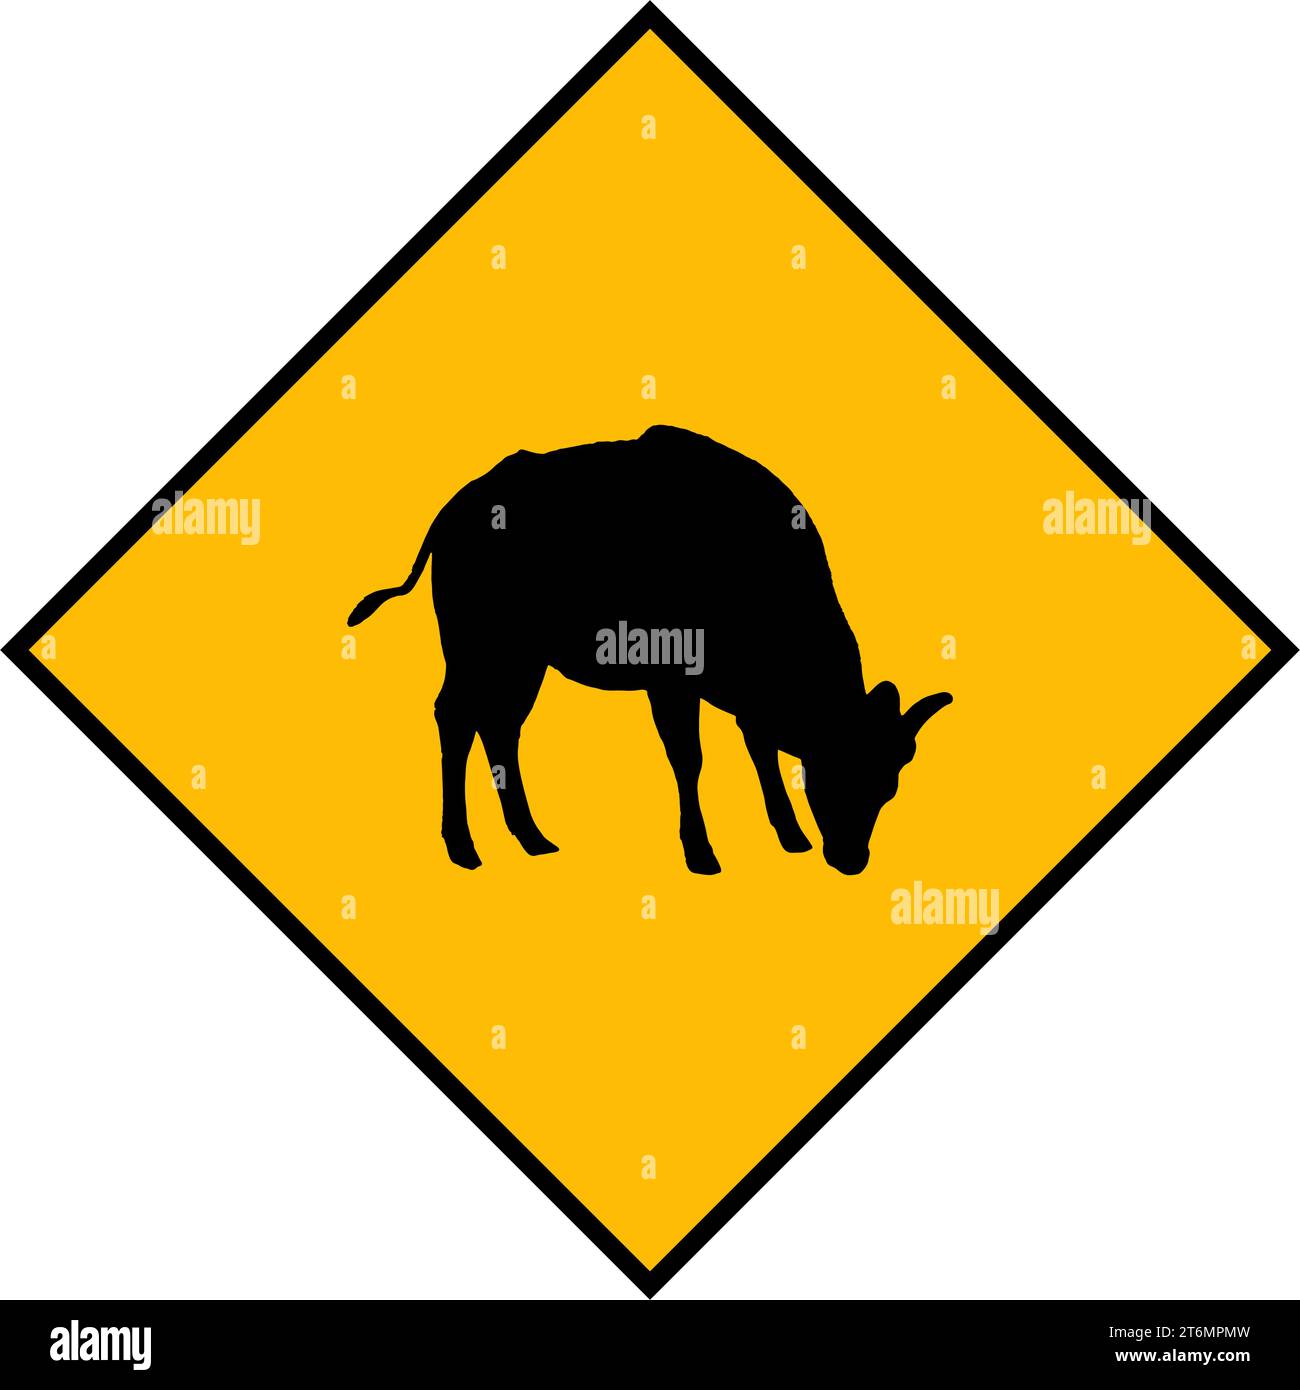 Yellow road sign: Cow Crossing Zone. warning signal. Drive slowly for animal safety. Common on roads. Vector illustration on white background. Stock Vector